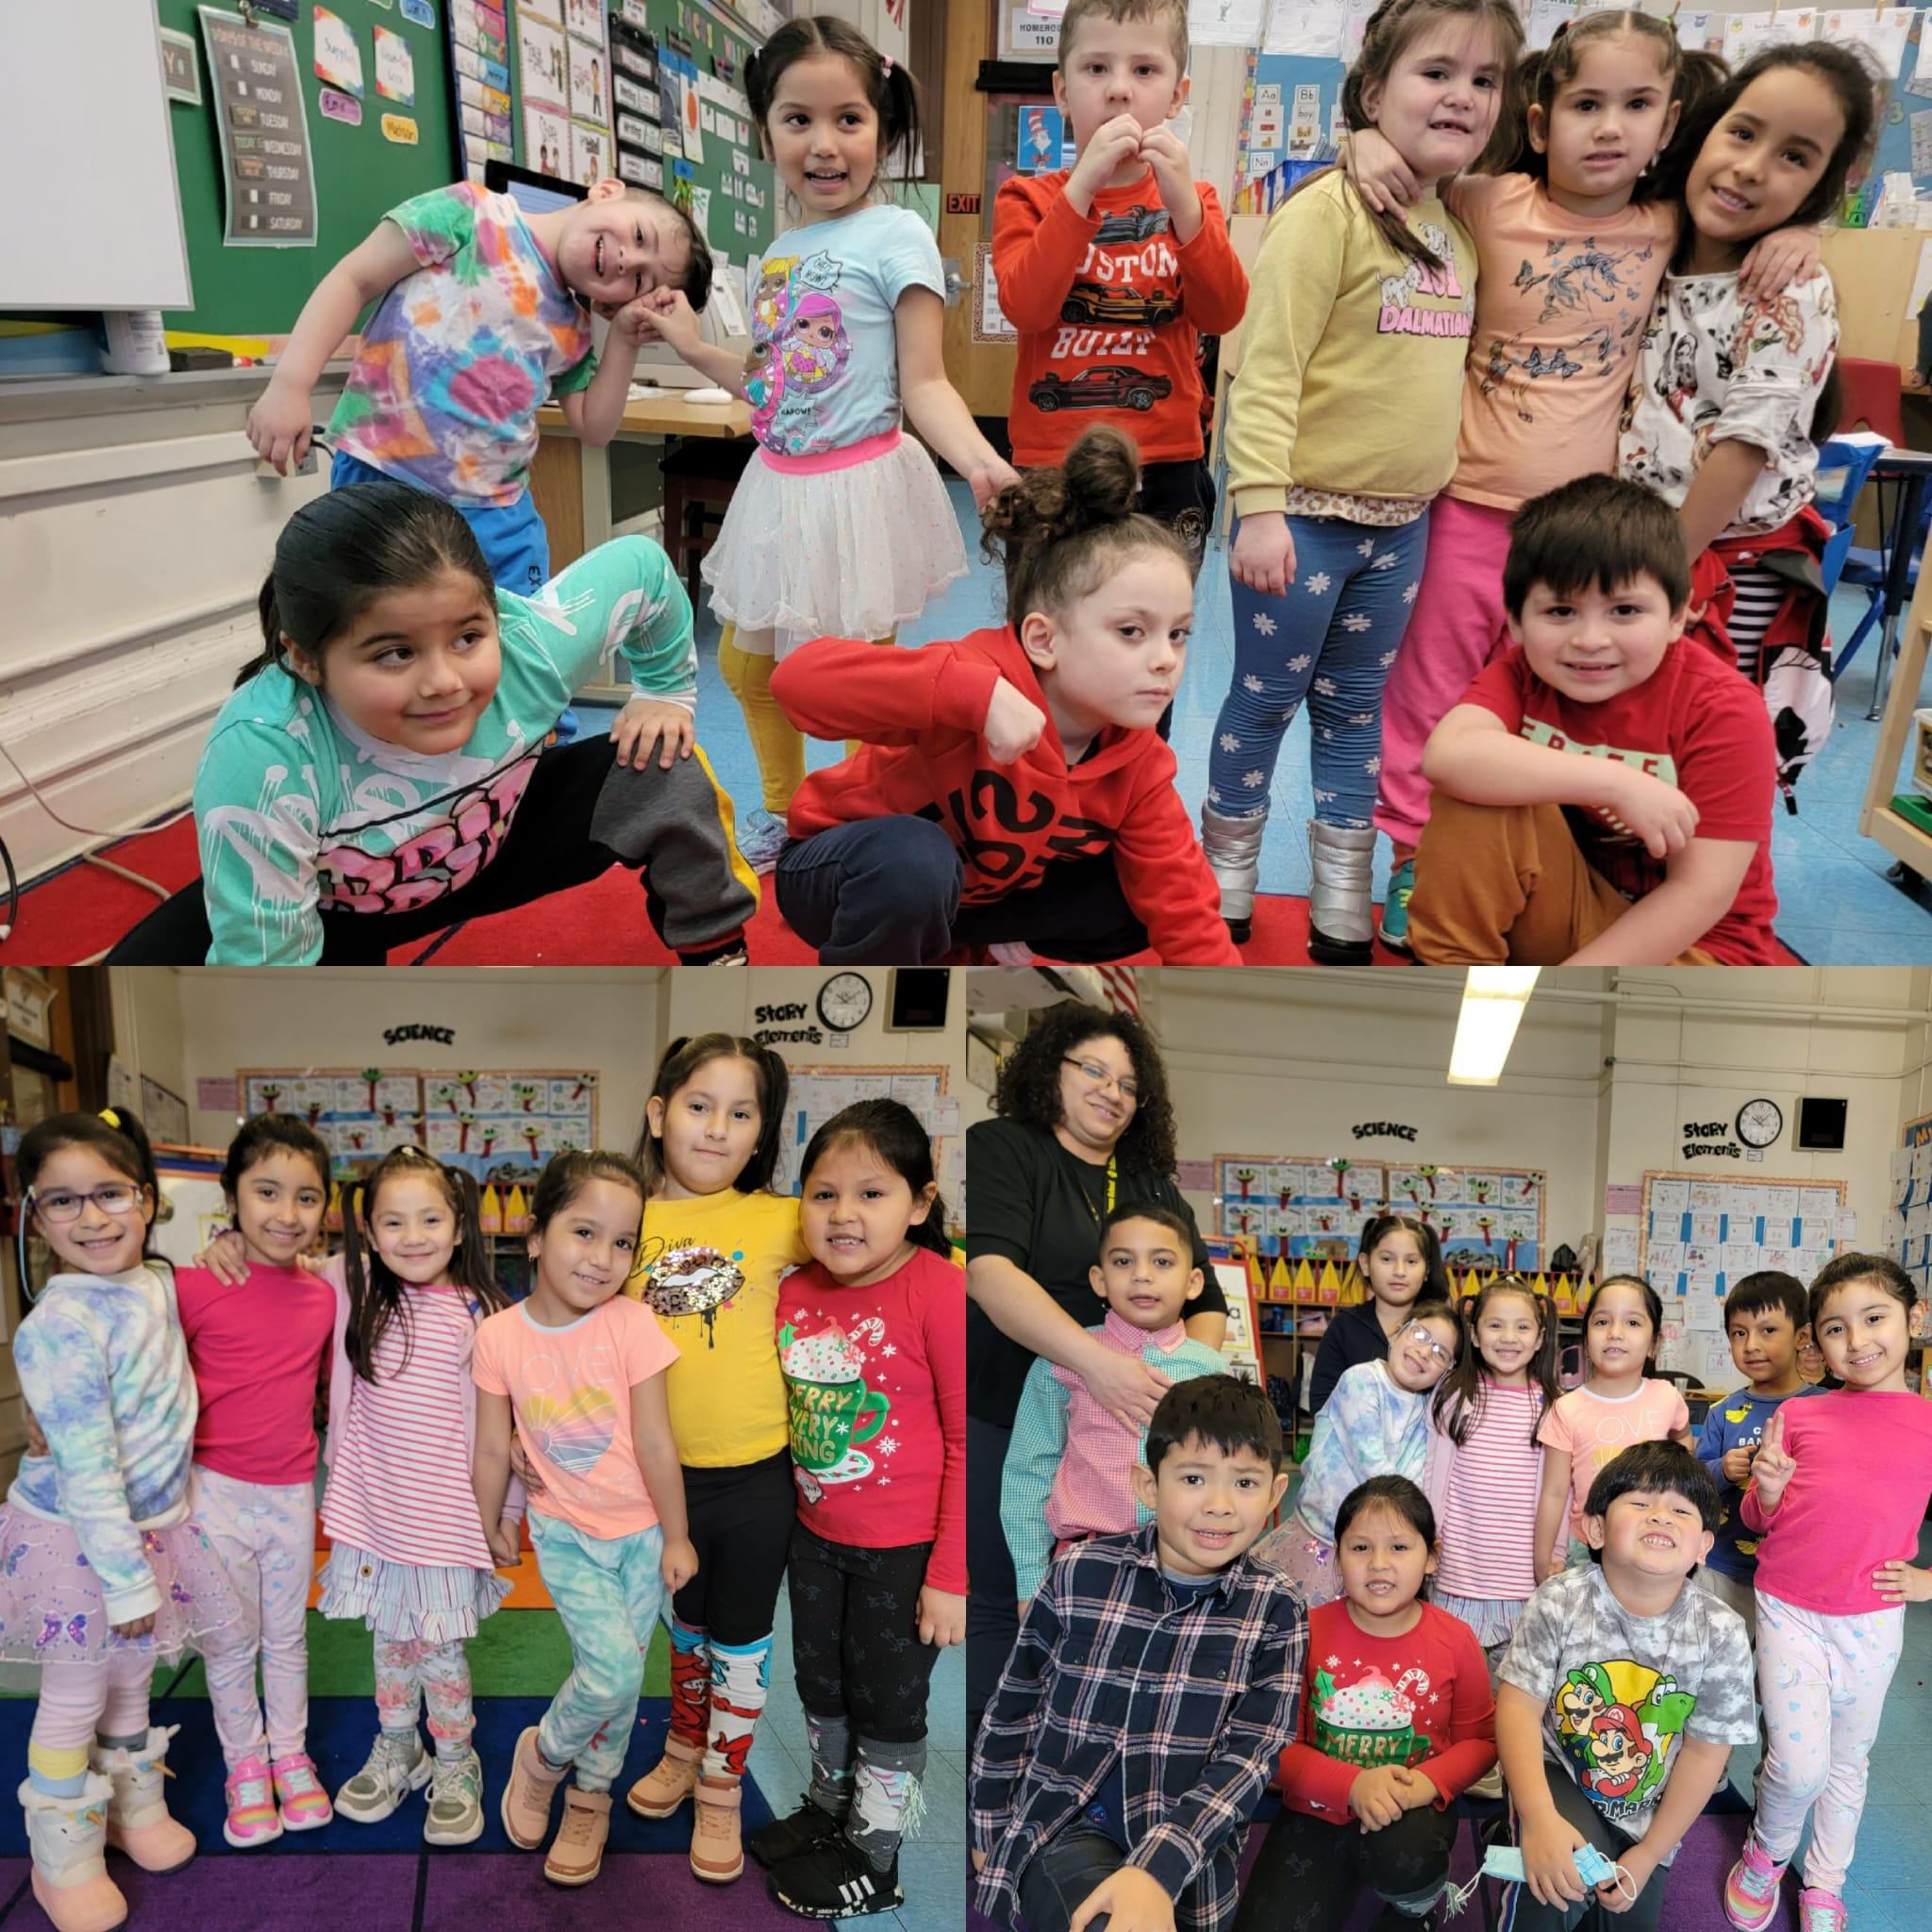 Wacky Wednesday during Read Across America at the Jefferson School